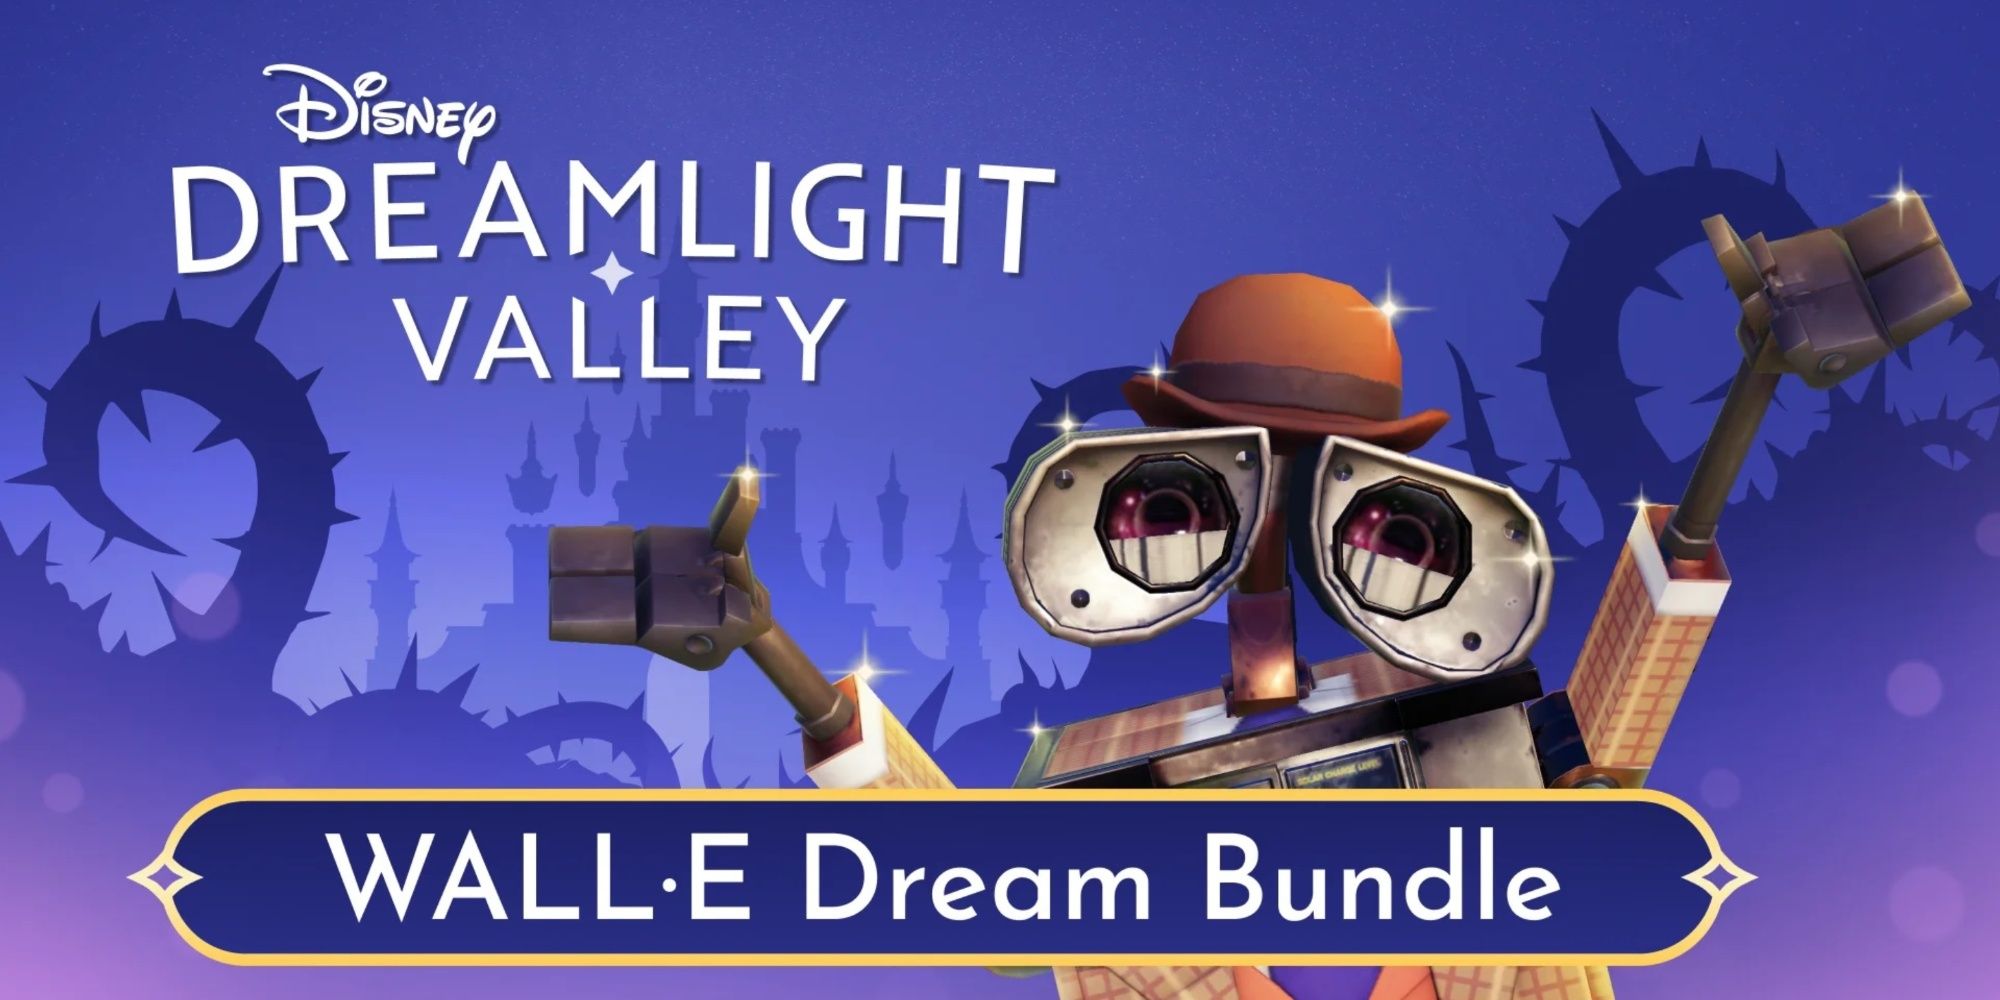 promotional image for the wall-e dream bundle